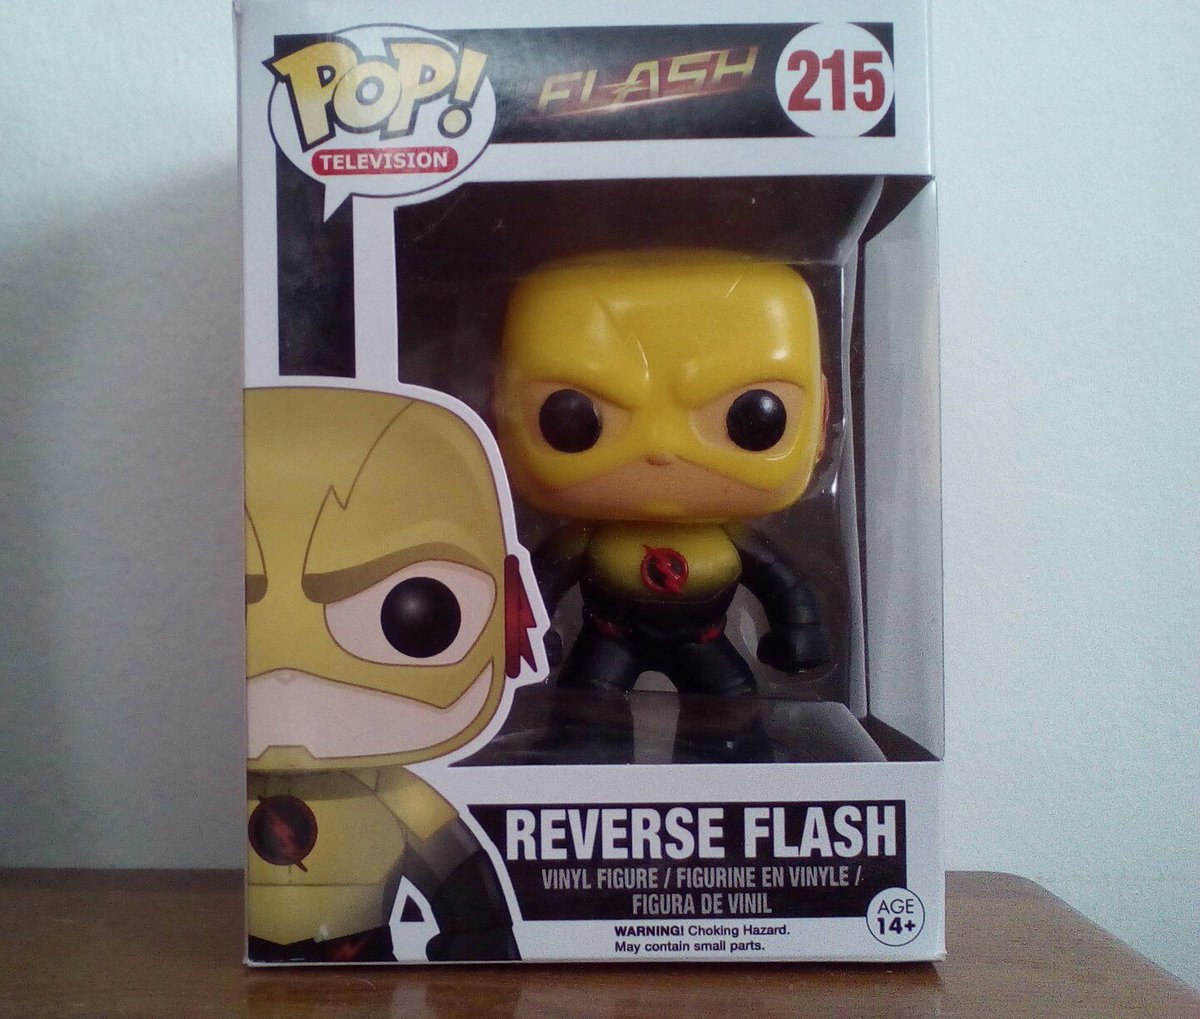 My mother has given me this wonderful Funko Pop of the Reverse Flash, this Funko...